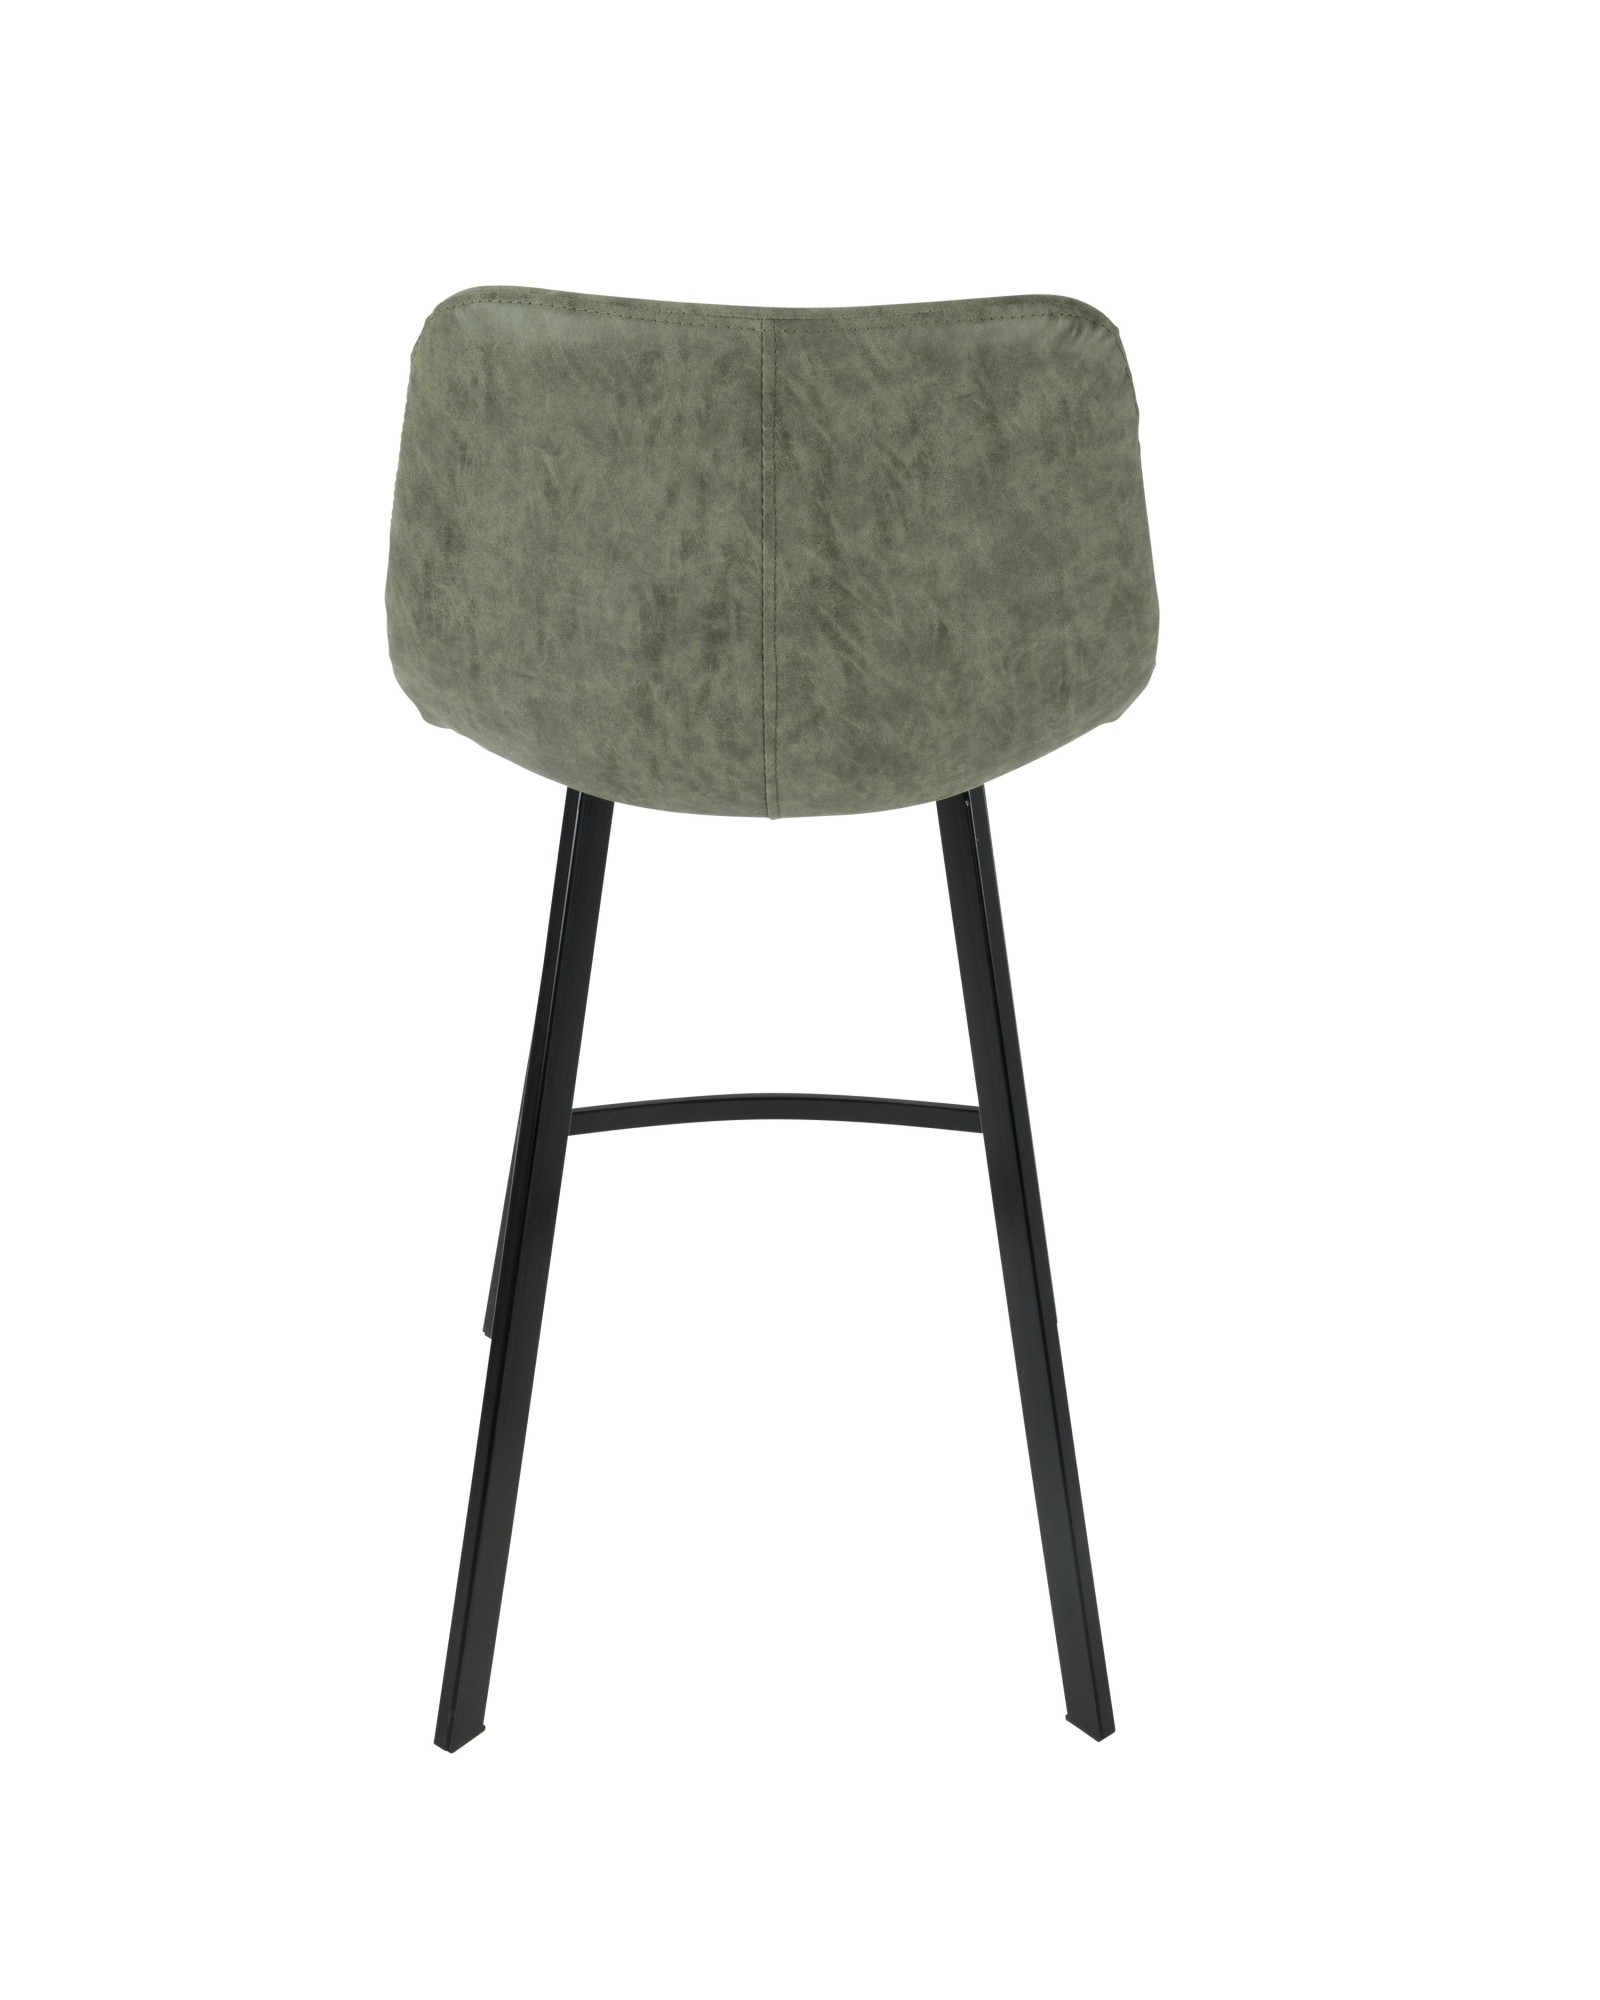 Outlaw Industrial Counter Stool in Black with Green Faux Leather - Set of 2